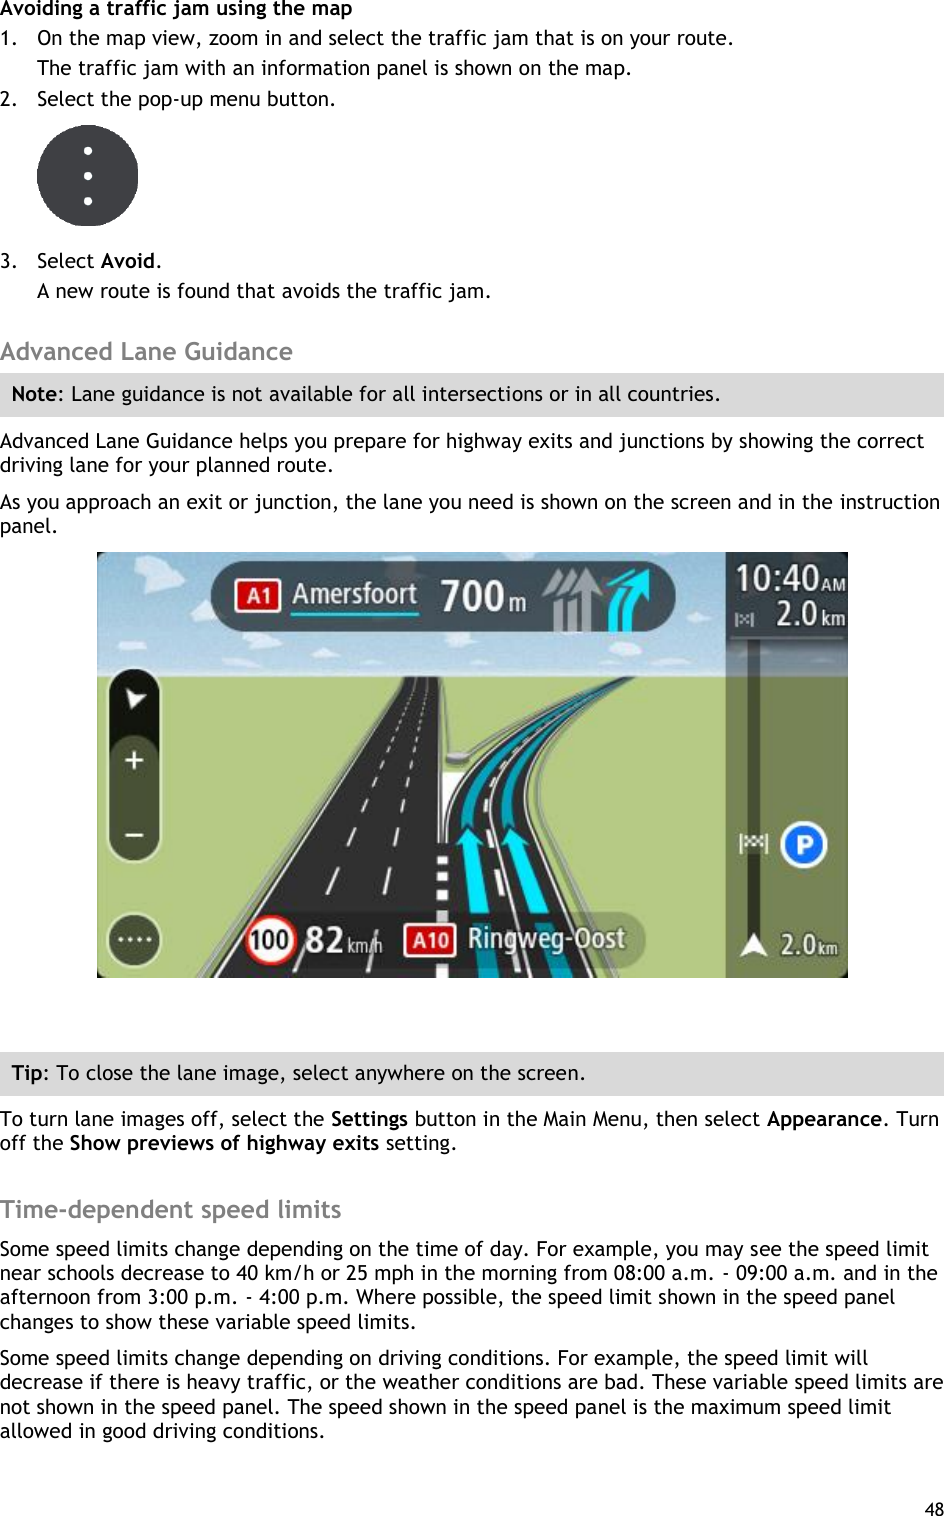  48  Avoiding a traffic jam using the map 1. On the map view, zoom in and select the traffic jam that is on your route. The traffic jam with an information panel is shown on the map. 2. Select the pop-up menu button.  3. Select Avoid. A new route is found that avoids the traffic jam.  Advanced Lane Guidance Note: Lane guidance is not available for all intersections or in all countries. Advanced Lane Guidance helps you prepare for highway exits and junctions by showing the correct driving lane for your planned route. As you approach an exit or junction, the lane you need is shown on the screen and in the instruction panel.   Tip: To close the lane image, select anywhere on the screen. To turn lane images off, select the Settings button in the Main Menu, then select Appearance. Turn off the Show previews of highway exits setting.  Time-dependent speed limits Some speed limits change depending on the time of day. For example, you may see the speed limit near schools decrease to 40 km/h or 25 mph in the morning from 08:00 a.m. - 09:00 a.m. and in the afternoon from 3:00 p.m. - 4:00 p.m. Where possible, the speed limit shown in the speed panel changes to show these variable speed limits. Some speed limits change depending on driving conditions. For example, the speed limit will decrease if there is heavy traffic, or the weather conditions are bad. These variable speed limits are not shown in the speed panel. The speed shown in the speed panel is the maximum speed limit allowed in good driving conditions. 